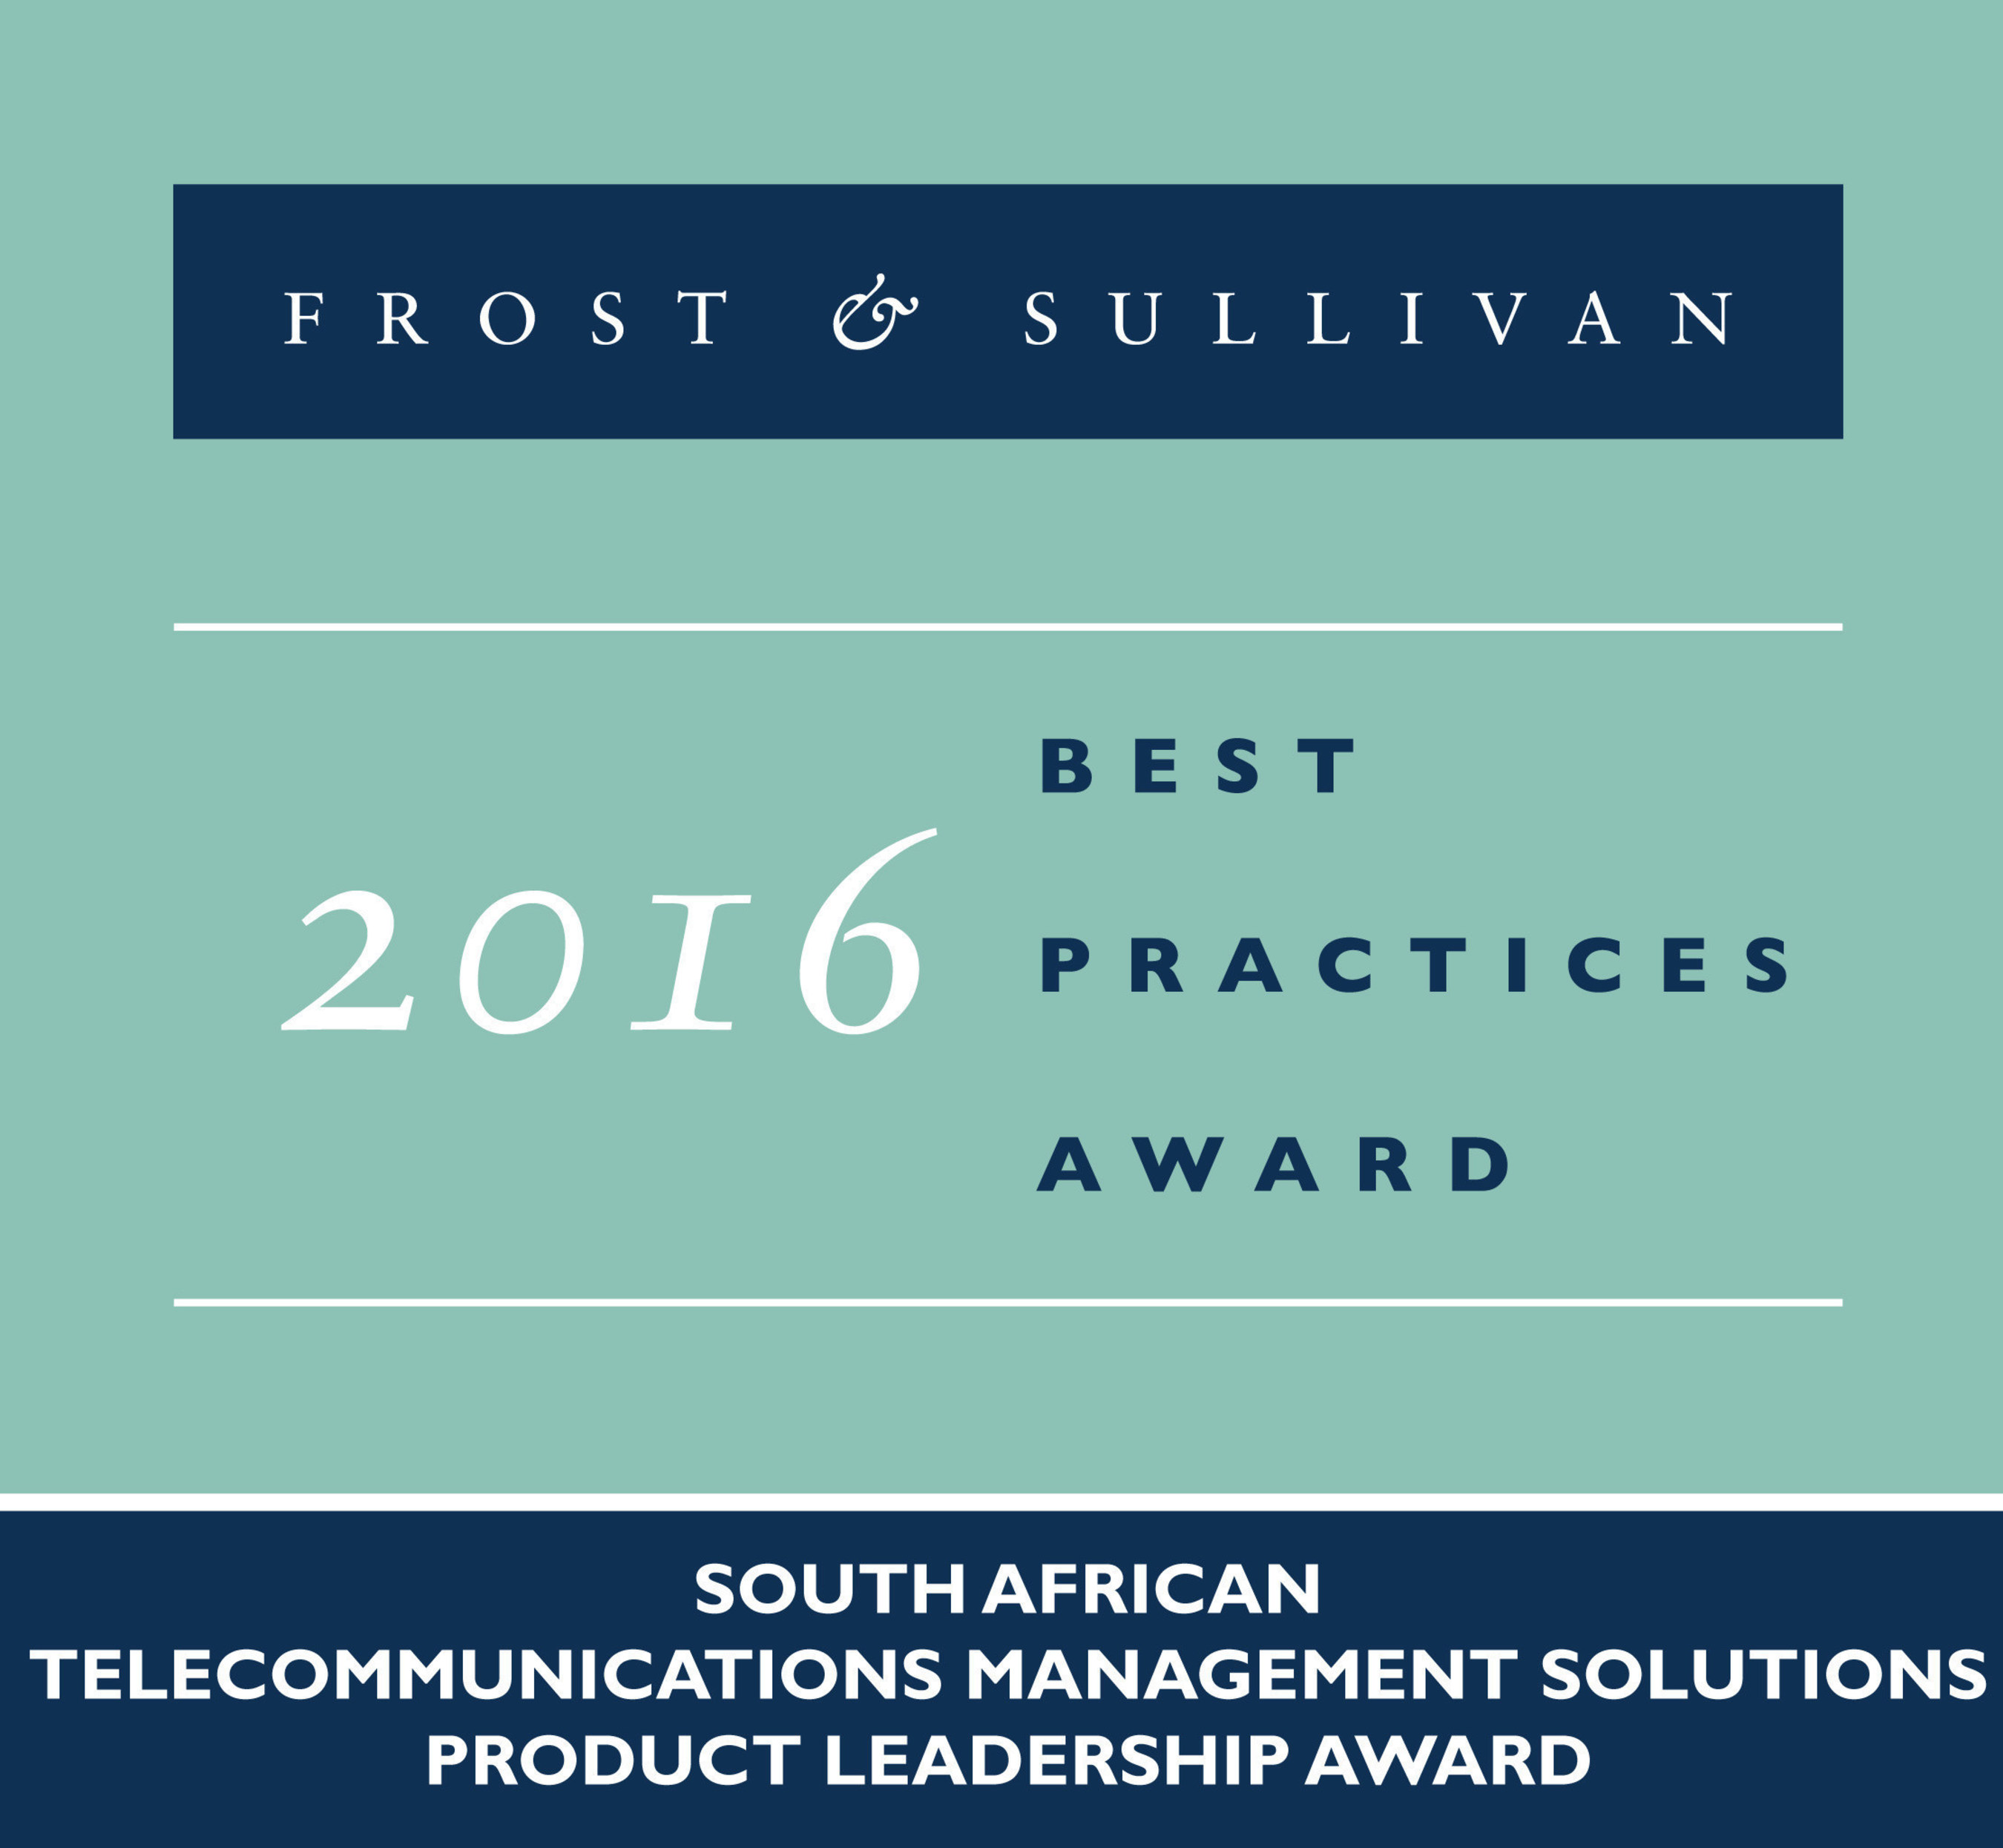 Frost & Sullivan recognizes Nebula with the 2016 South Africa Product Leadership Award.